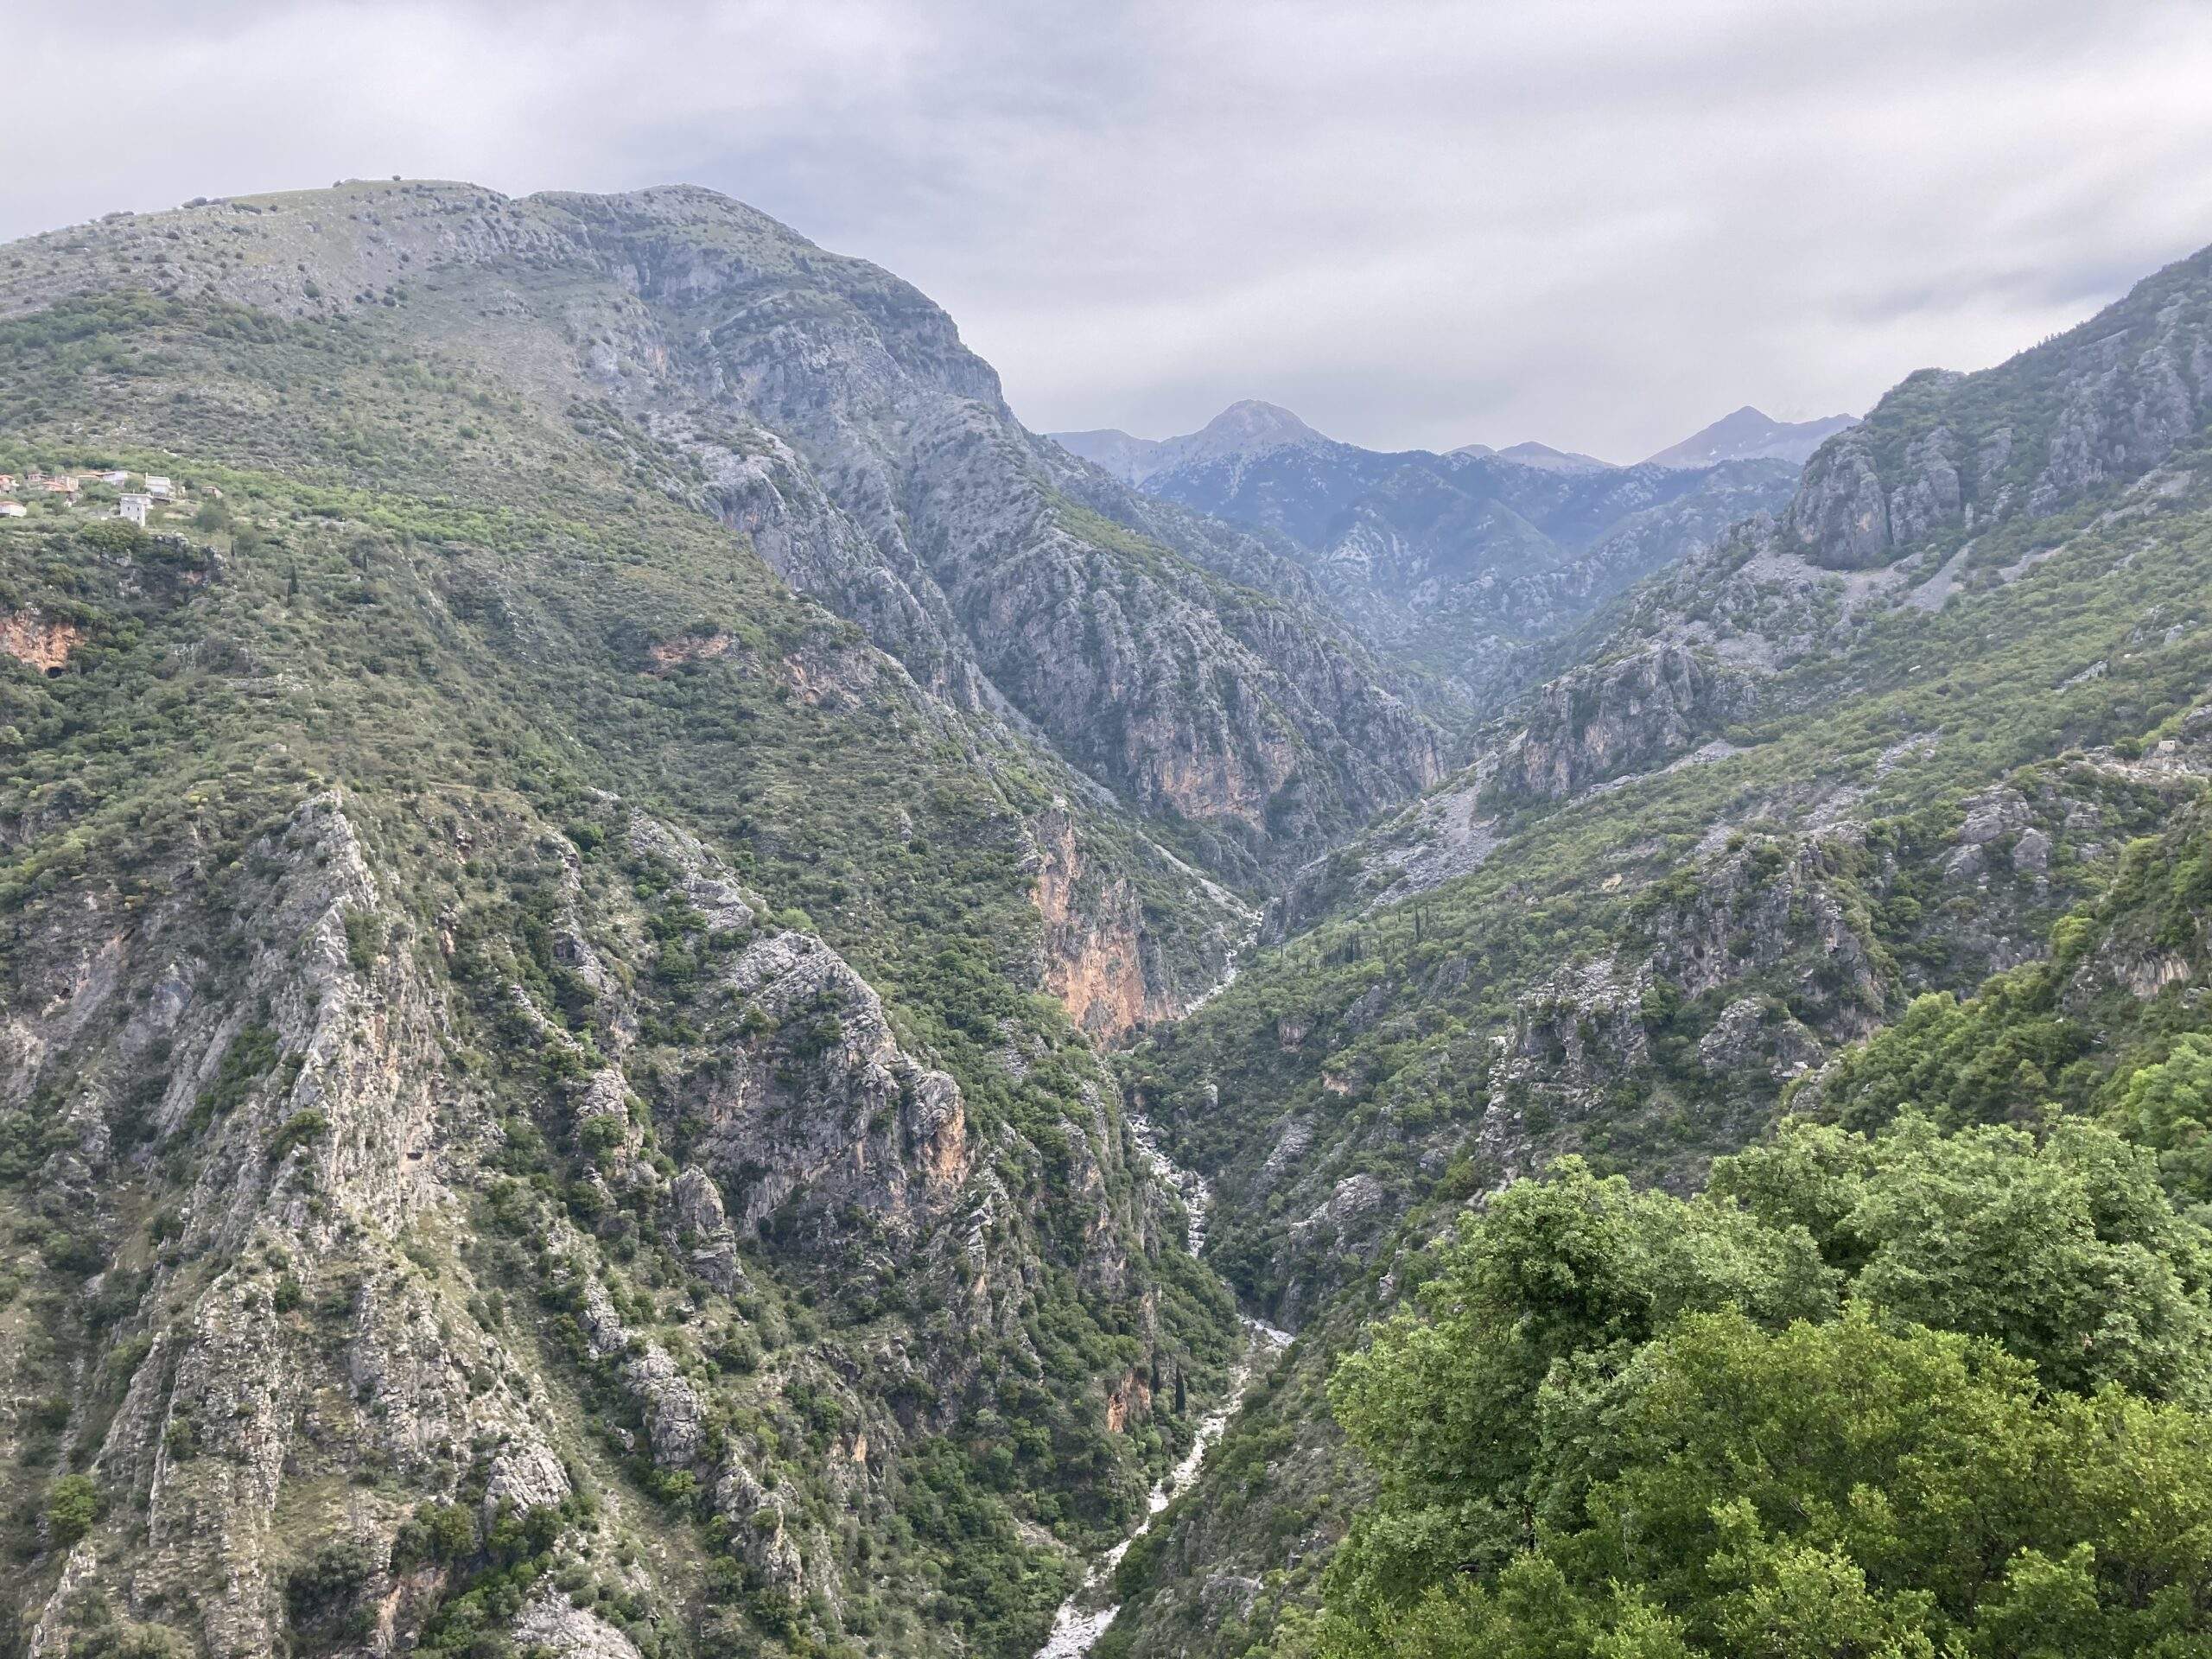 View of Viros Gorge above Kardamili with Taygetos in the background